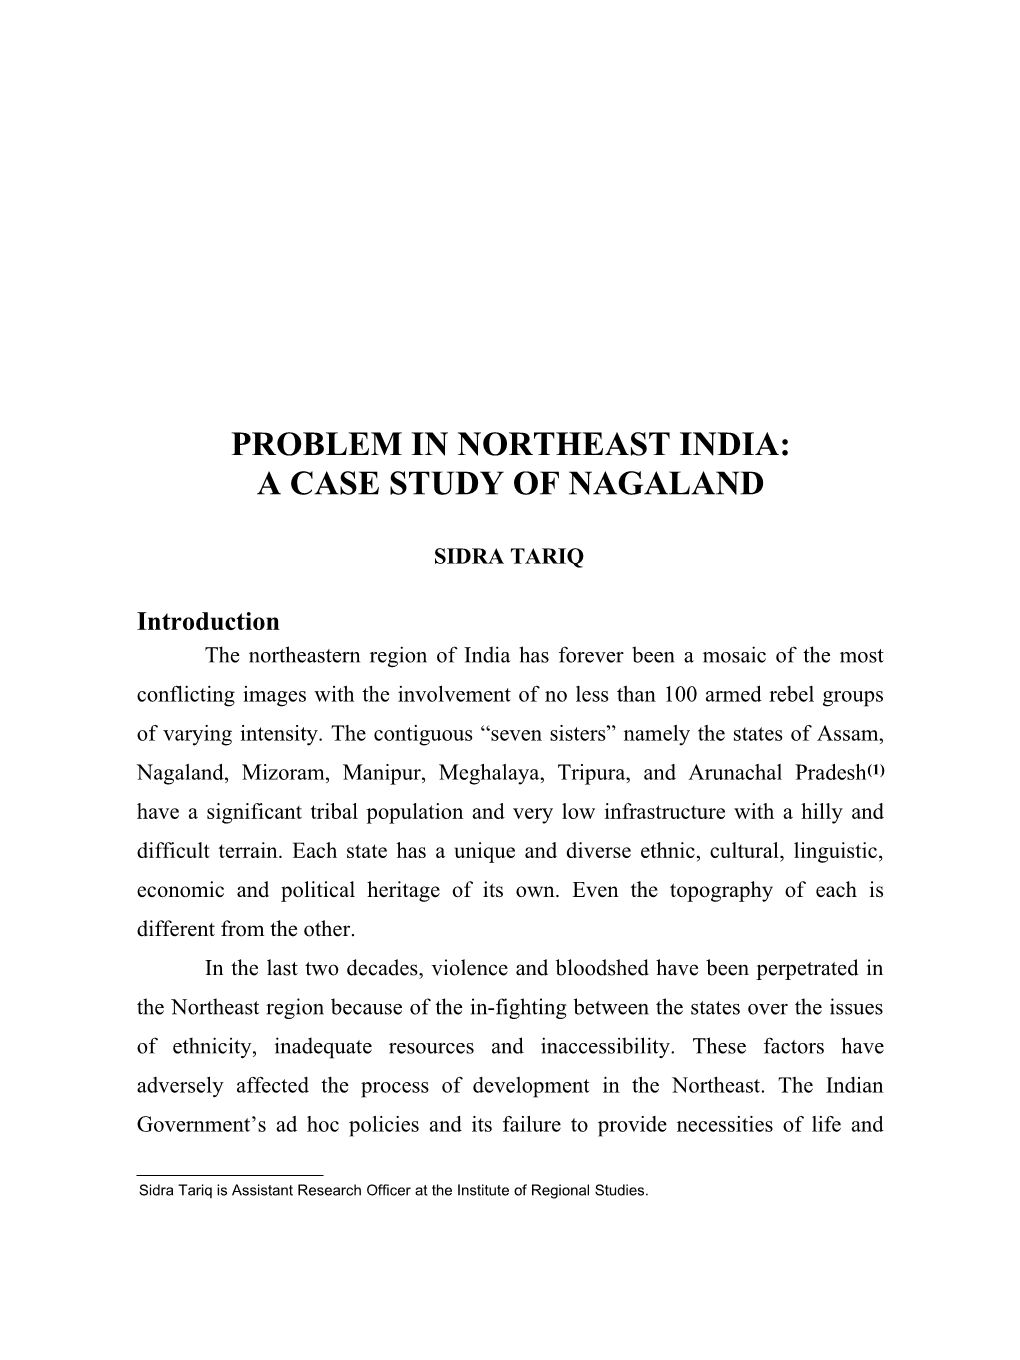 Problem in Northeast India: a Case Study of Nagaland